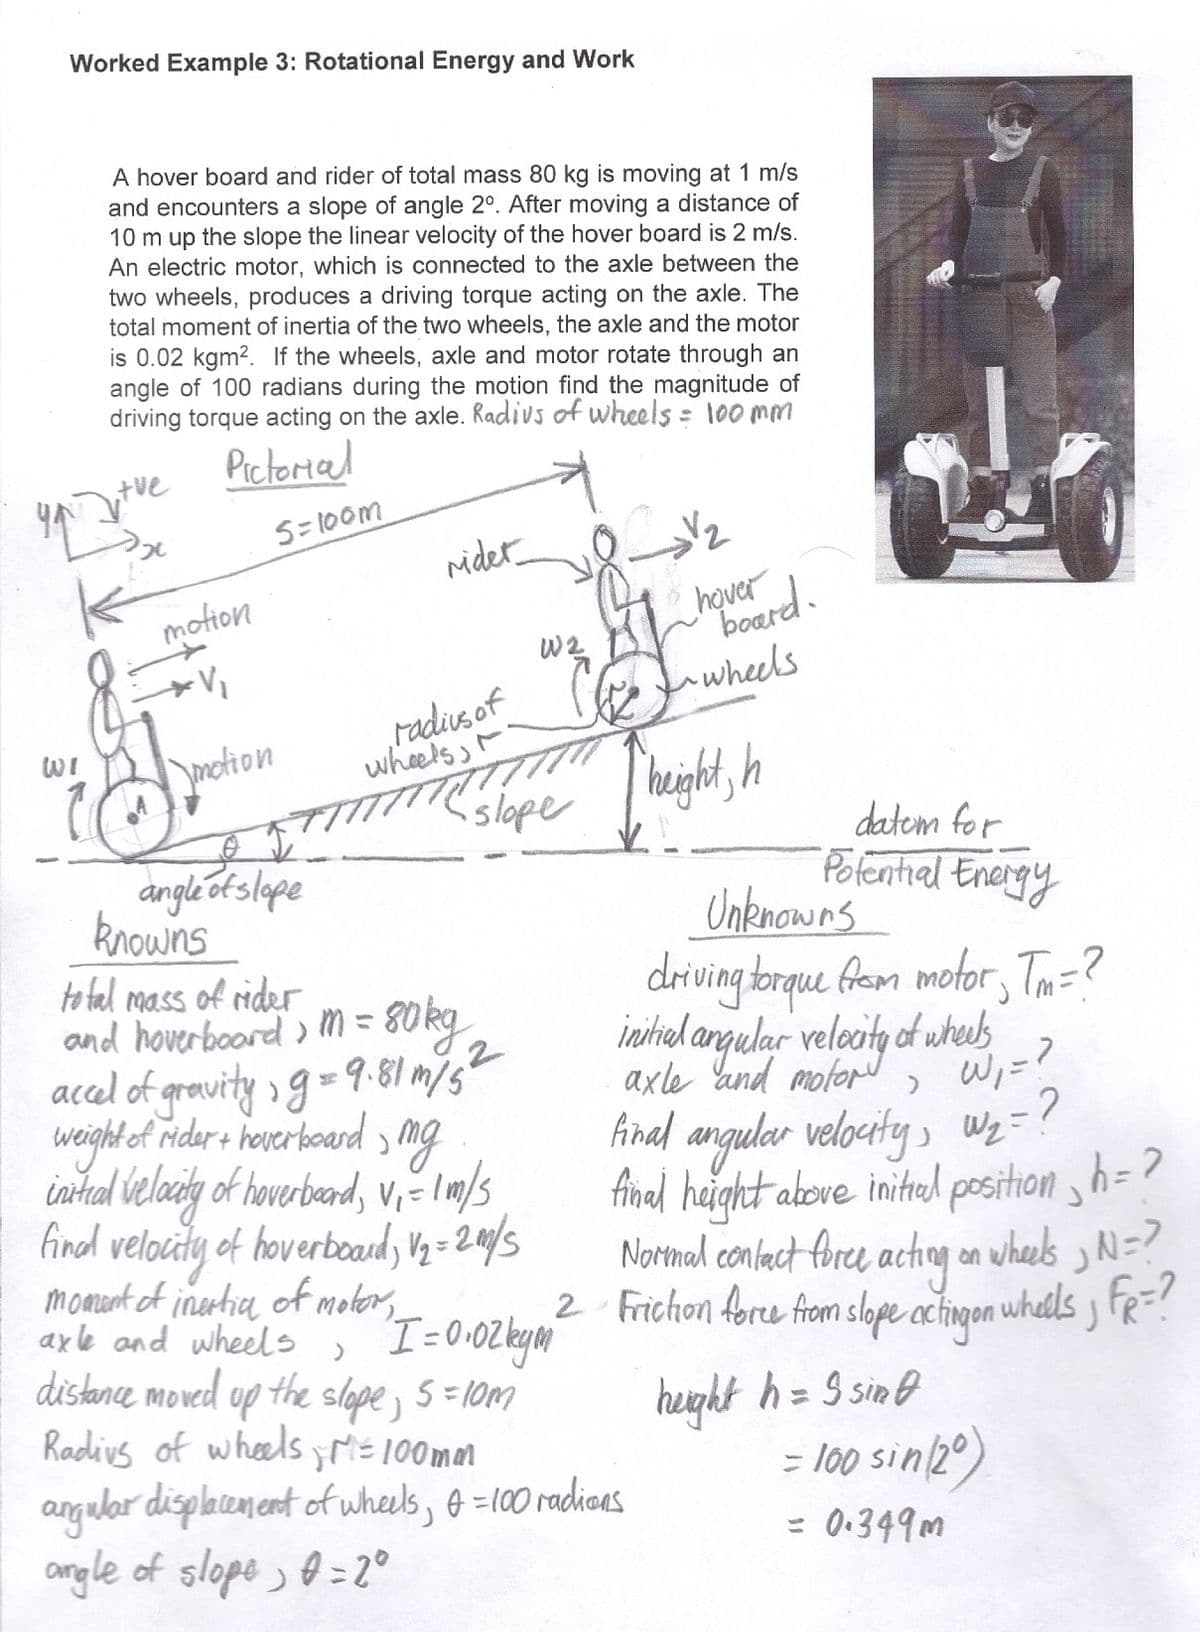 Worked Example 3: Rotational Energy and Work
you
WI
A hover board and rider of total mass 80 kg is moving at 1 m/s
and encounters a slope of angle 2°. After moving a distance of
10 m up the slope the linear velocity of the hover board is 2 m/s.
An electric motor, which is connected to the axle between the
two wheels, produces a driving torque acting on the axle. The
total moment of inertia of the two wheels, the axle and the motor
is 0.02 kgm². If the wheels, axle and motor rotate through an
angle of 100 radians during the motion find the magnitude of
driving torque acting on the axle. Radius of wheels = 100mm
Pictorial
tue
2₂
10
motion
V₁
motion
5=100m
TT
angle of slope
knowns
rider
radius of
wheels,
total mass of rider
m
2
and hoverboard > M = 80kg
accel of gravity; g = 9.81 m/5
weight of rider + hoverboard, mg
initial velocity of hoverboard, V₁ = 1 m/s
final velocity of hoverboard, V₂=200/5
moment of inertia of motor,
axle and wheels
slope
KL
b
W 2
'I=0.02 ky
V₂
hover
board.
wheels
}
up the slope, 5=10m
distance moved up the slope
Radius of wheels; M = 100mm
angular displacement of wheels, f = 100 radions
angle of slope) 0 = 2°
height, h
Unknowns
driving torque from motor, Tm=?
initial angular velocity of wheels
axle and motor
= ?
>
final angular velocity, W₂ = ?
final height above initial position h=2
Normal contact force acting on wheels, N=?
2 Friction force from slope acting on whells; FR=?
height h = 9 sinf
datom for
Potential Energy
الله
= 100 sin (20)
= 0.349m
J